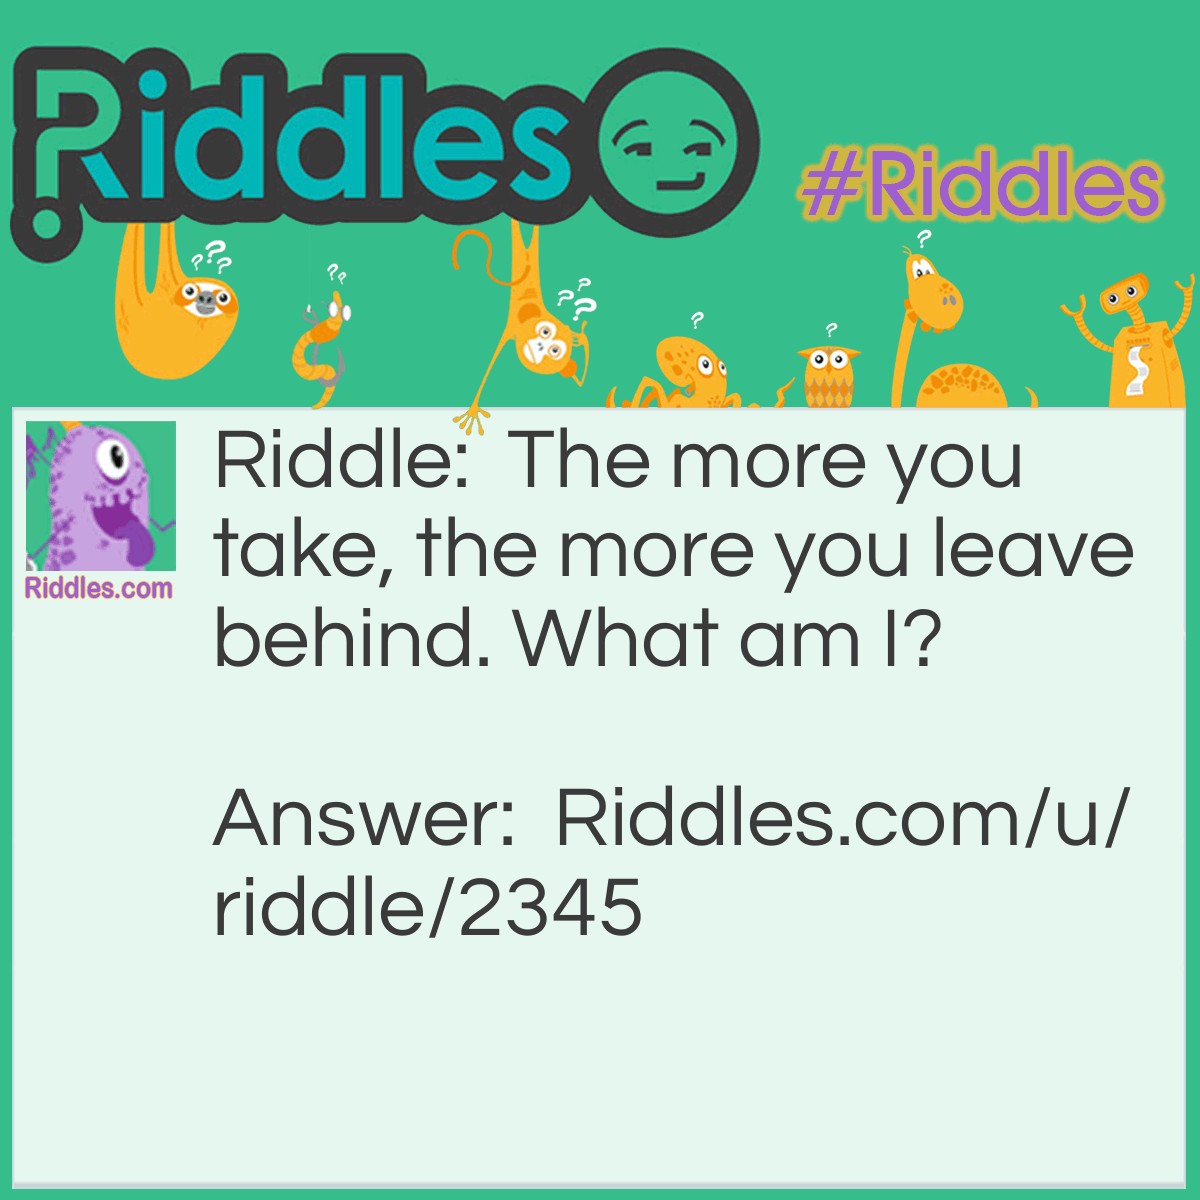 Riddle: The more you take, the more you leave behind. "<a href="/what-am-i">What am I?</a>" Answer: Footsteps.